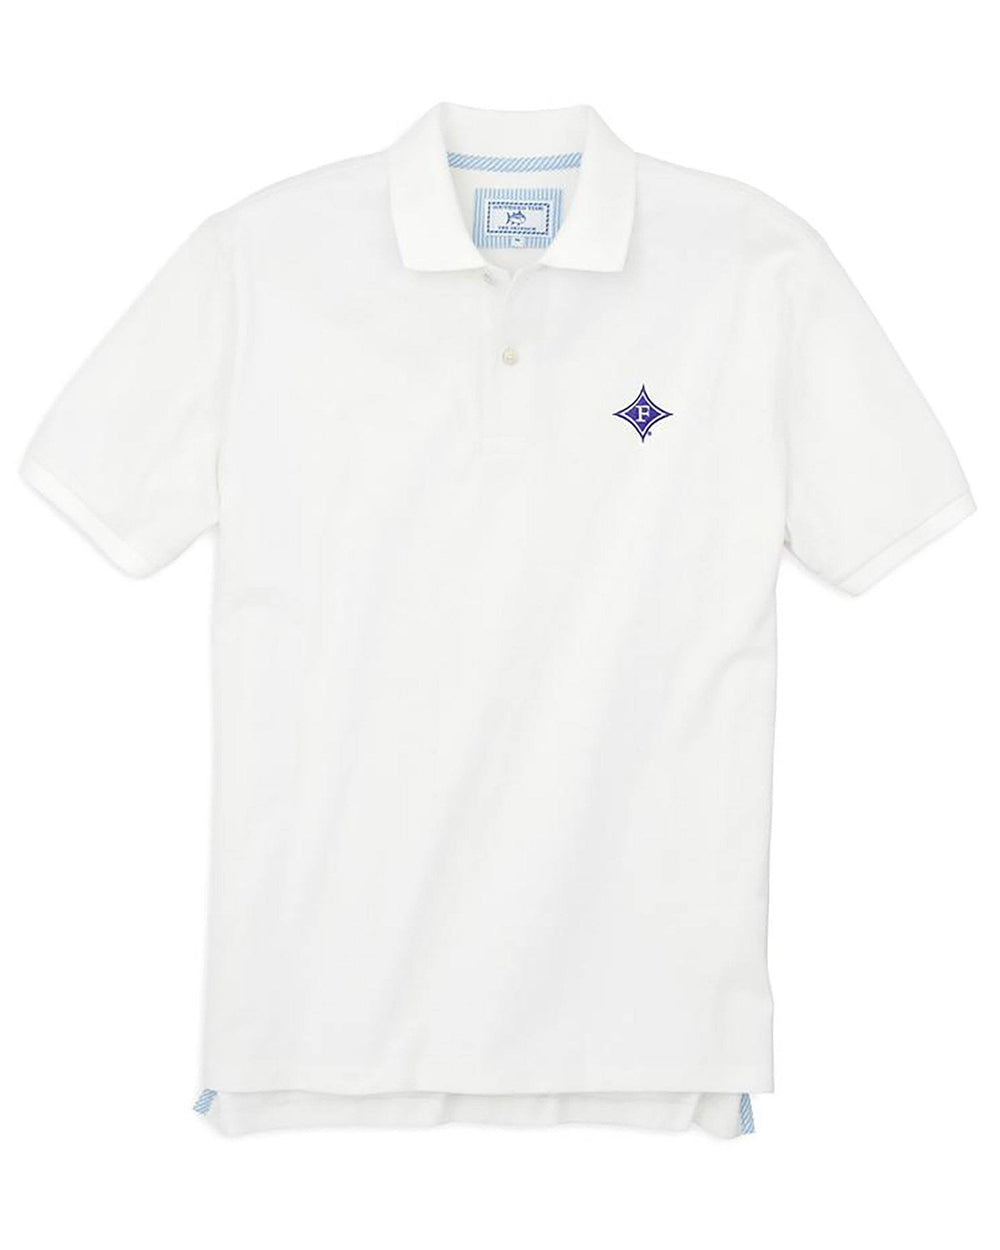 The front view of the Men's White Furman Pique Polo Shirt by Southern Tide - Classic White